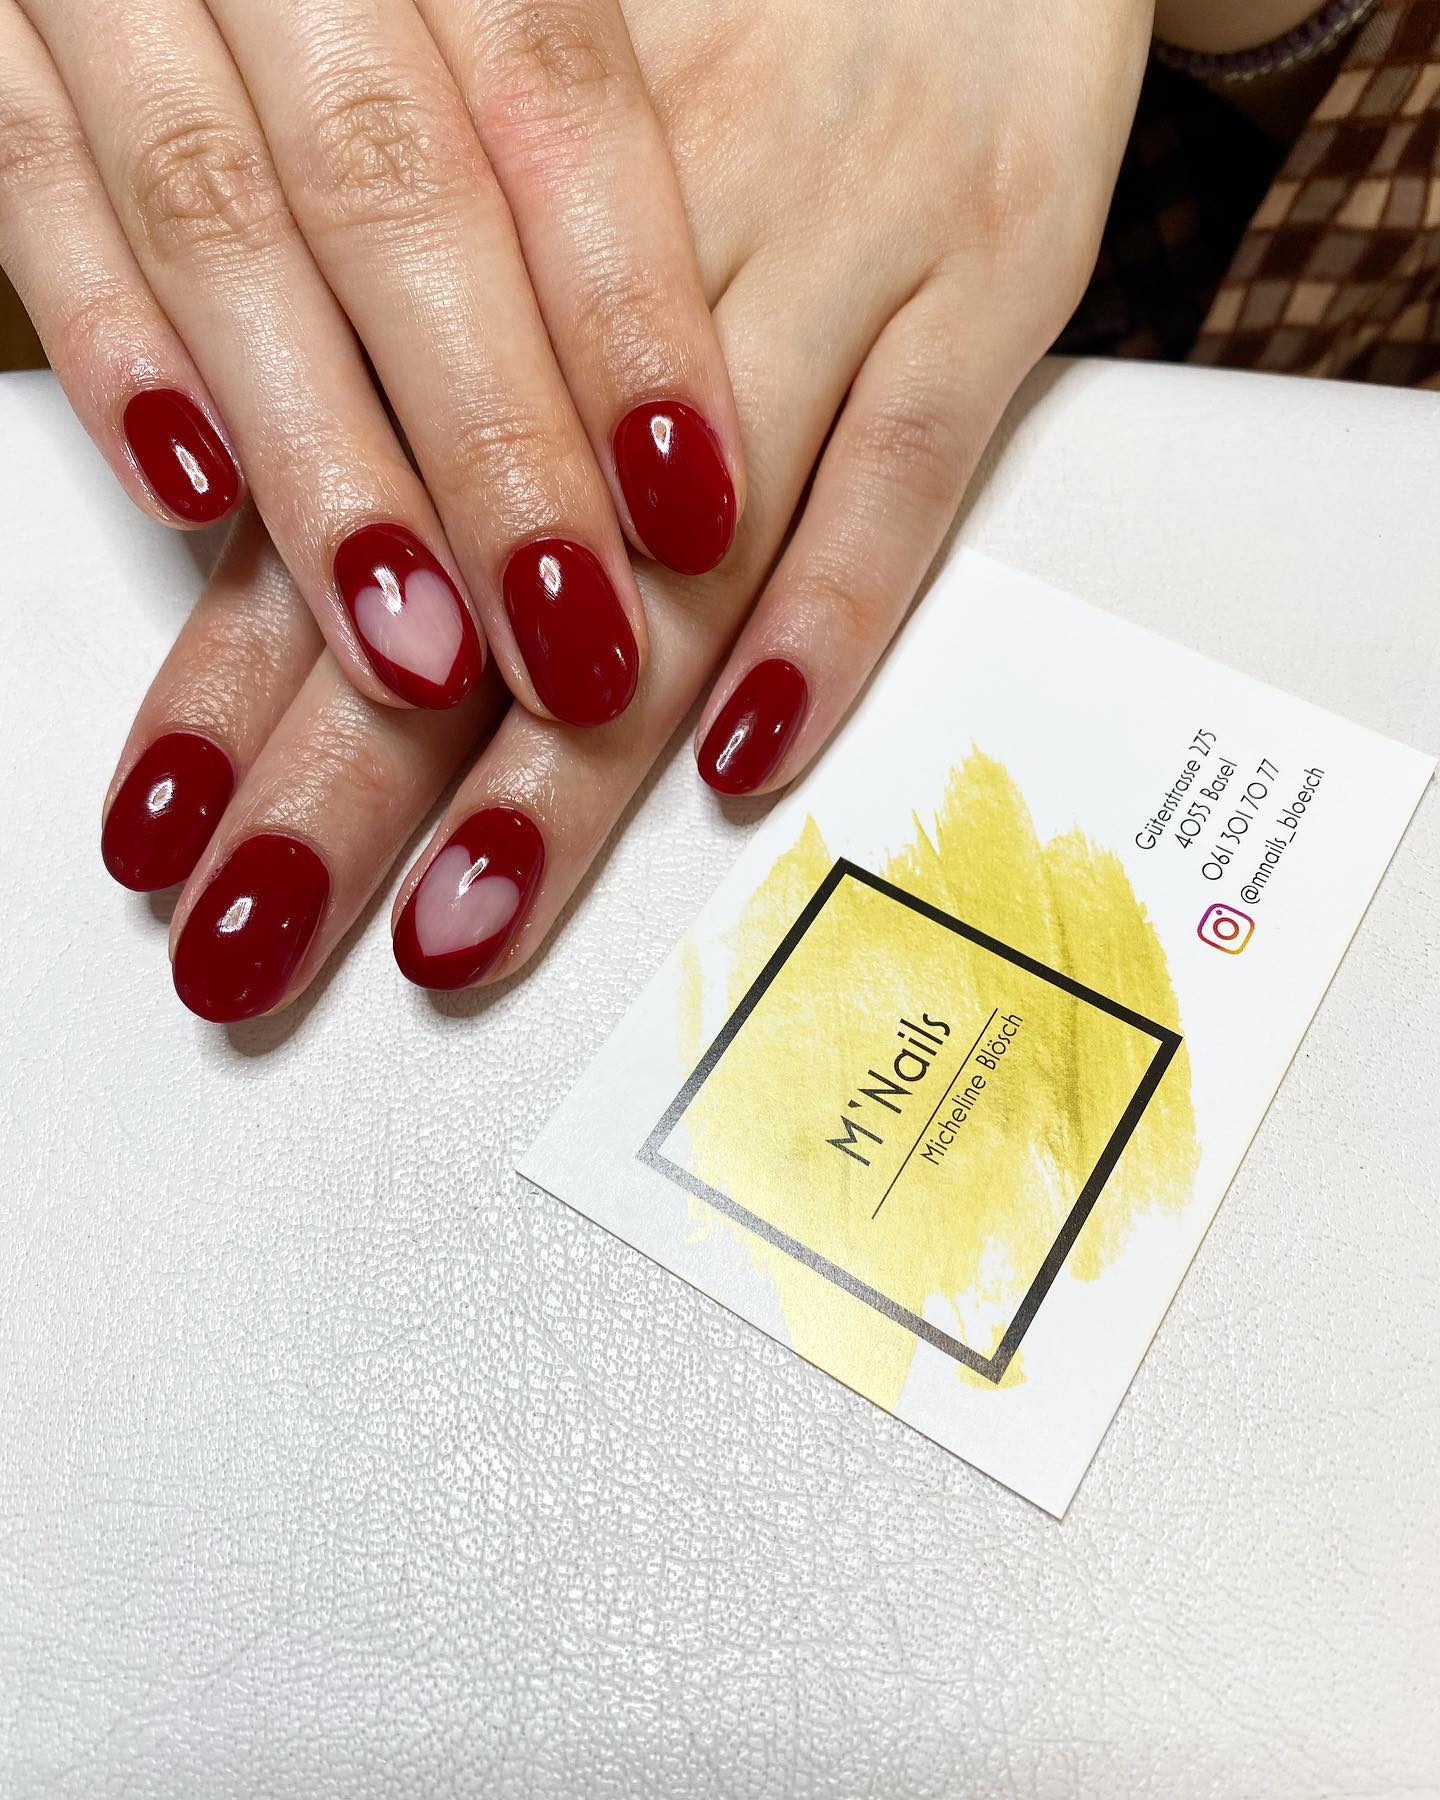 You can add some energy to your dark red manicure with a cute nail art. With a little help, this nail design is so easy to get.